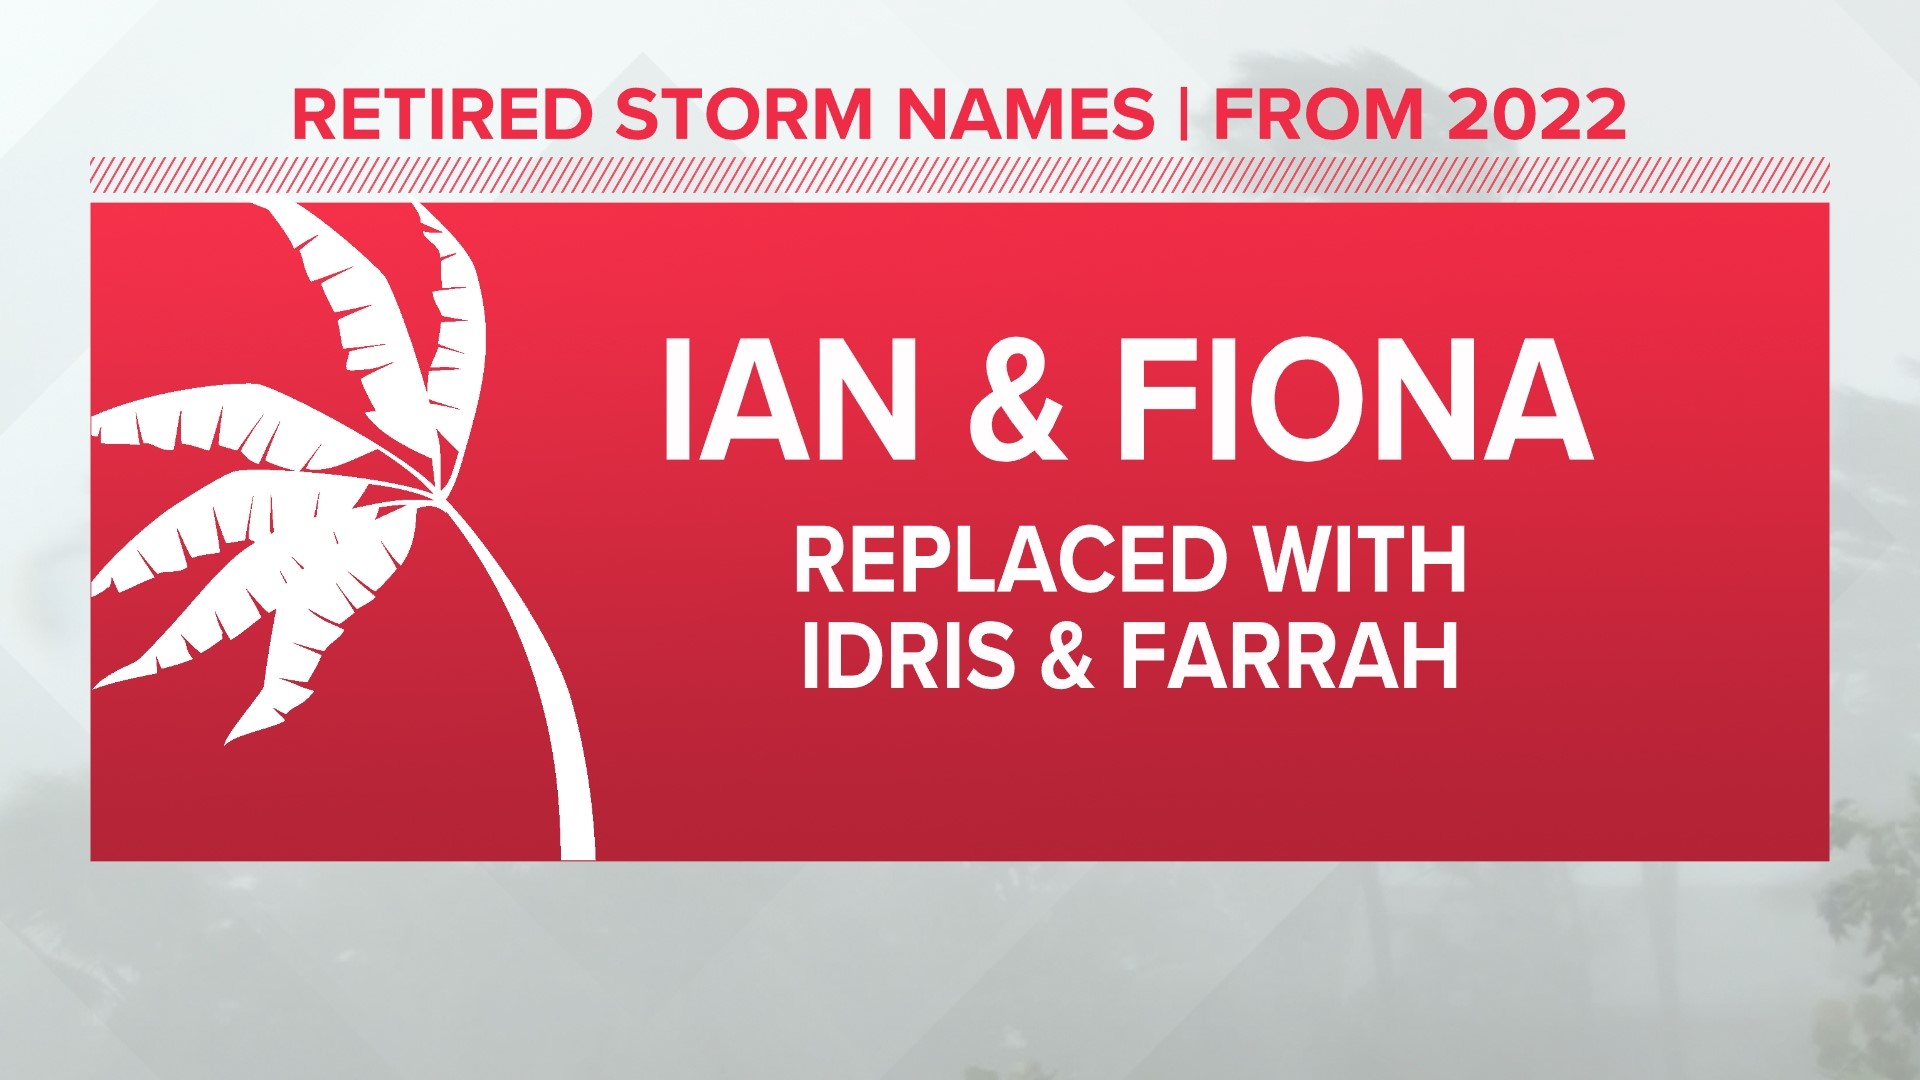 These two names will be replaced with Idris and Farrah in the 6-year rotating list produced by the National Hurricane Center.